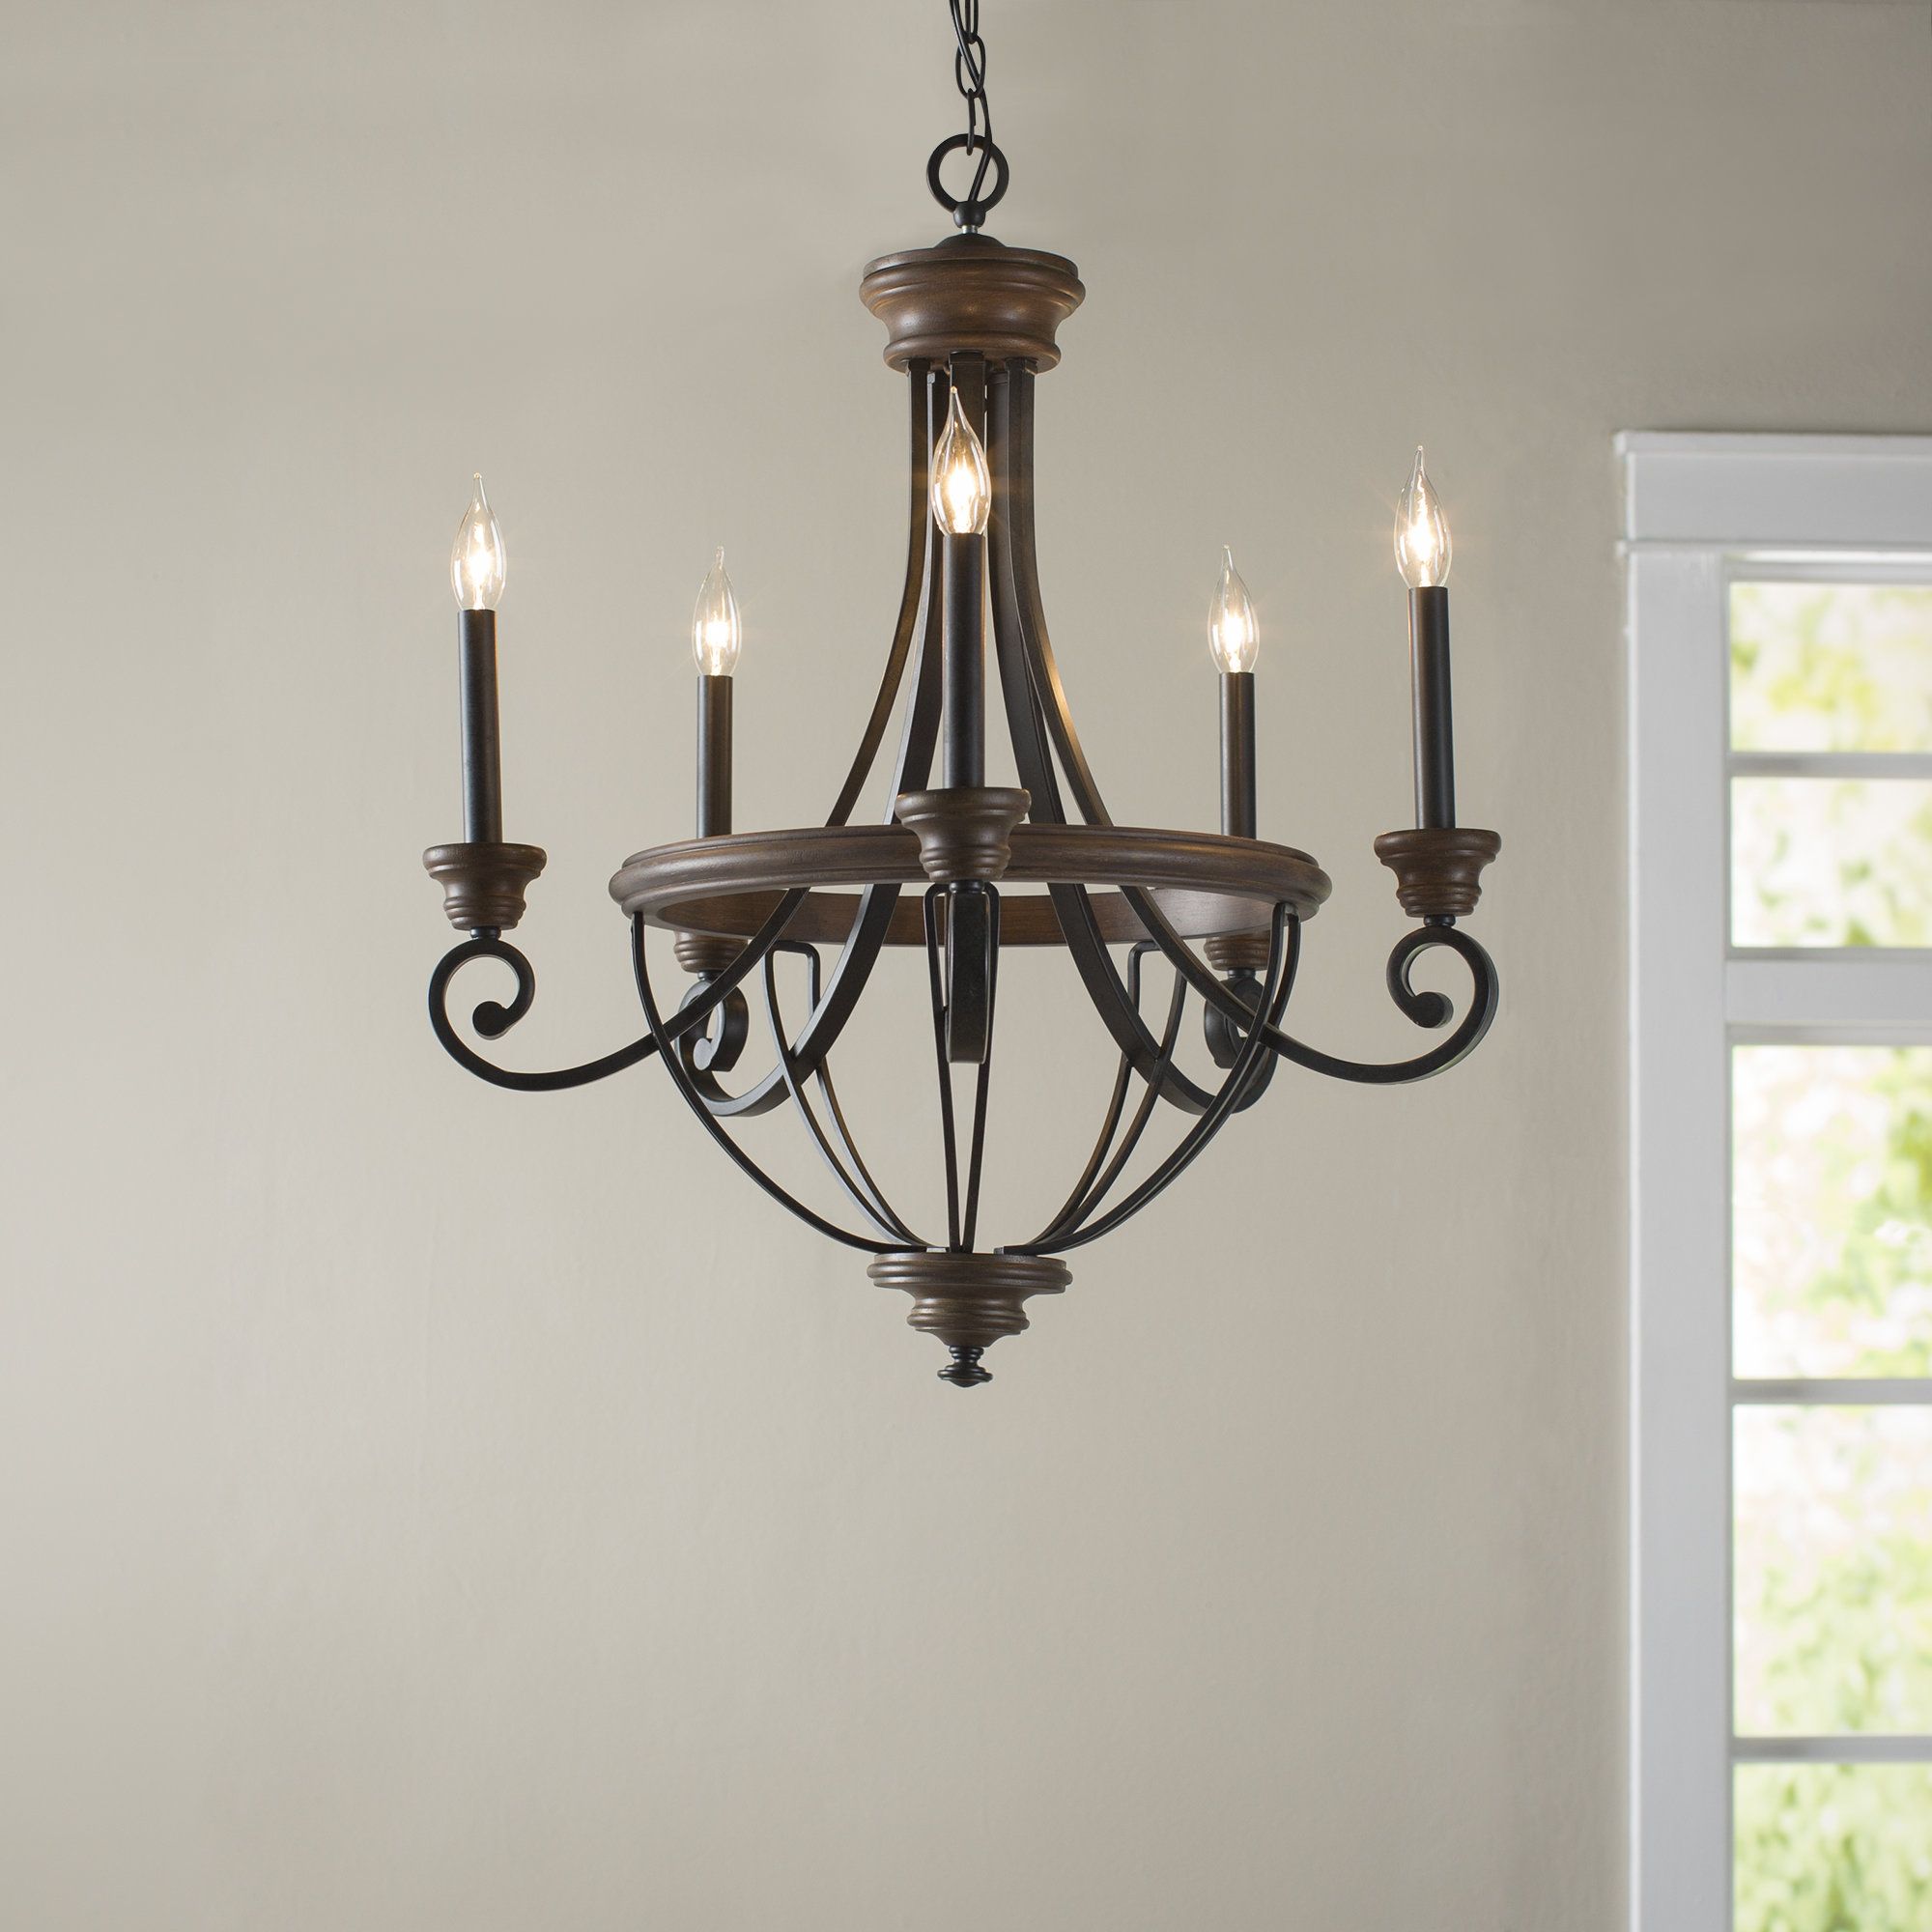 Laurel Foundry Modern Farmhouse Nanteuil 5 Light Empire Chandelier Throughout Phifer 6 Light Empire Chandeliers (View 26 of 30)